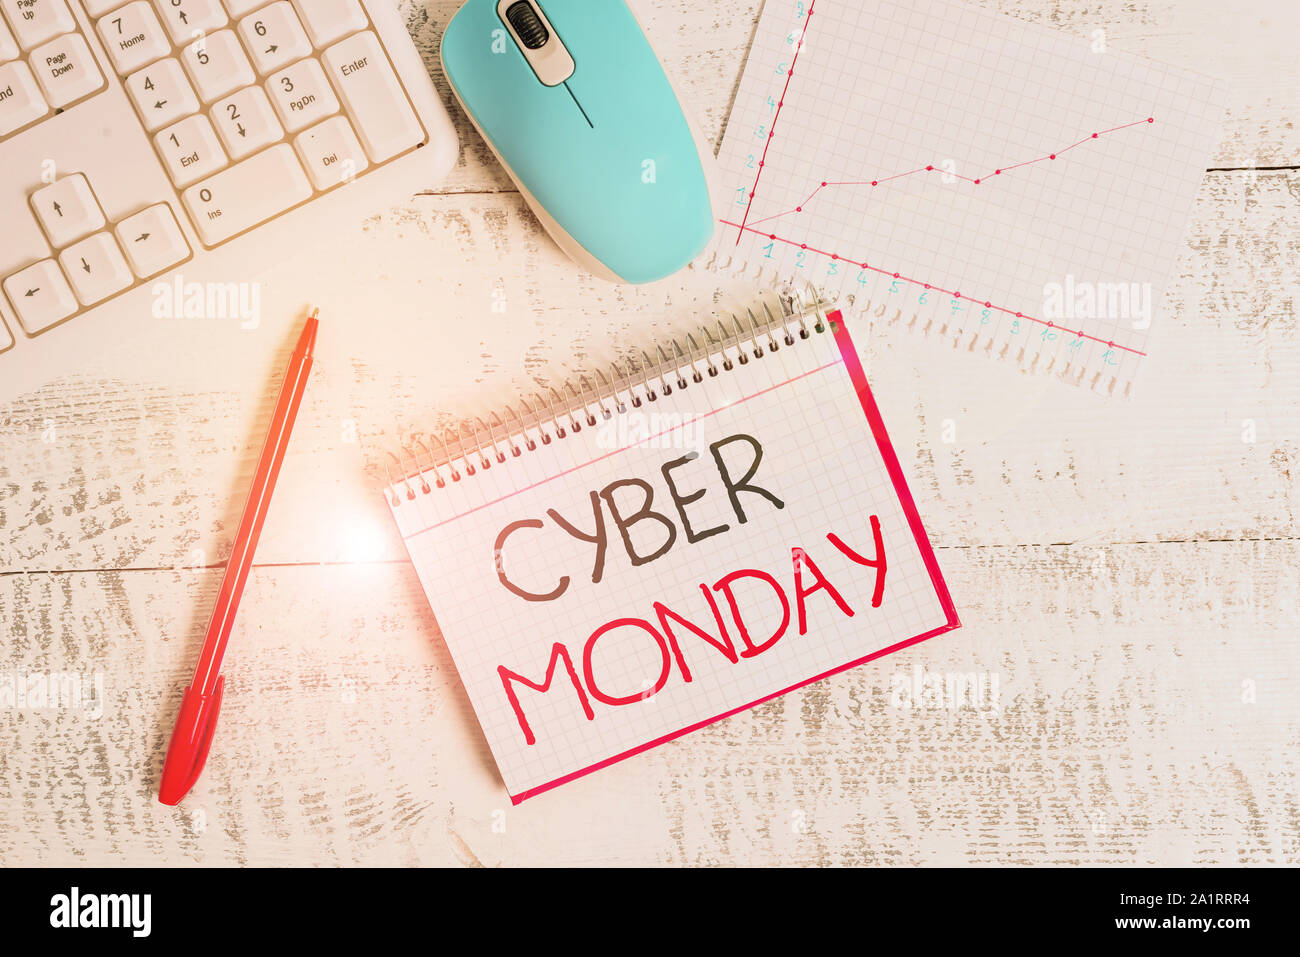 Conceptual Hand Writing Showing Cyber Monday Concept Meaning